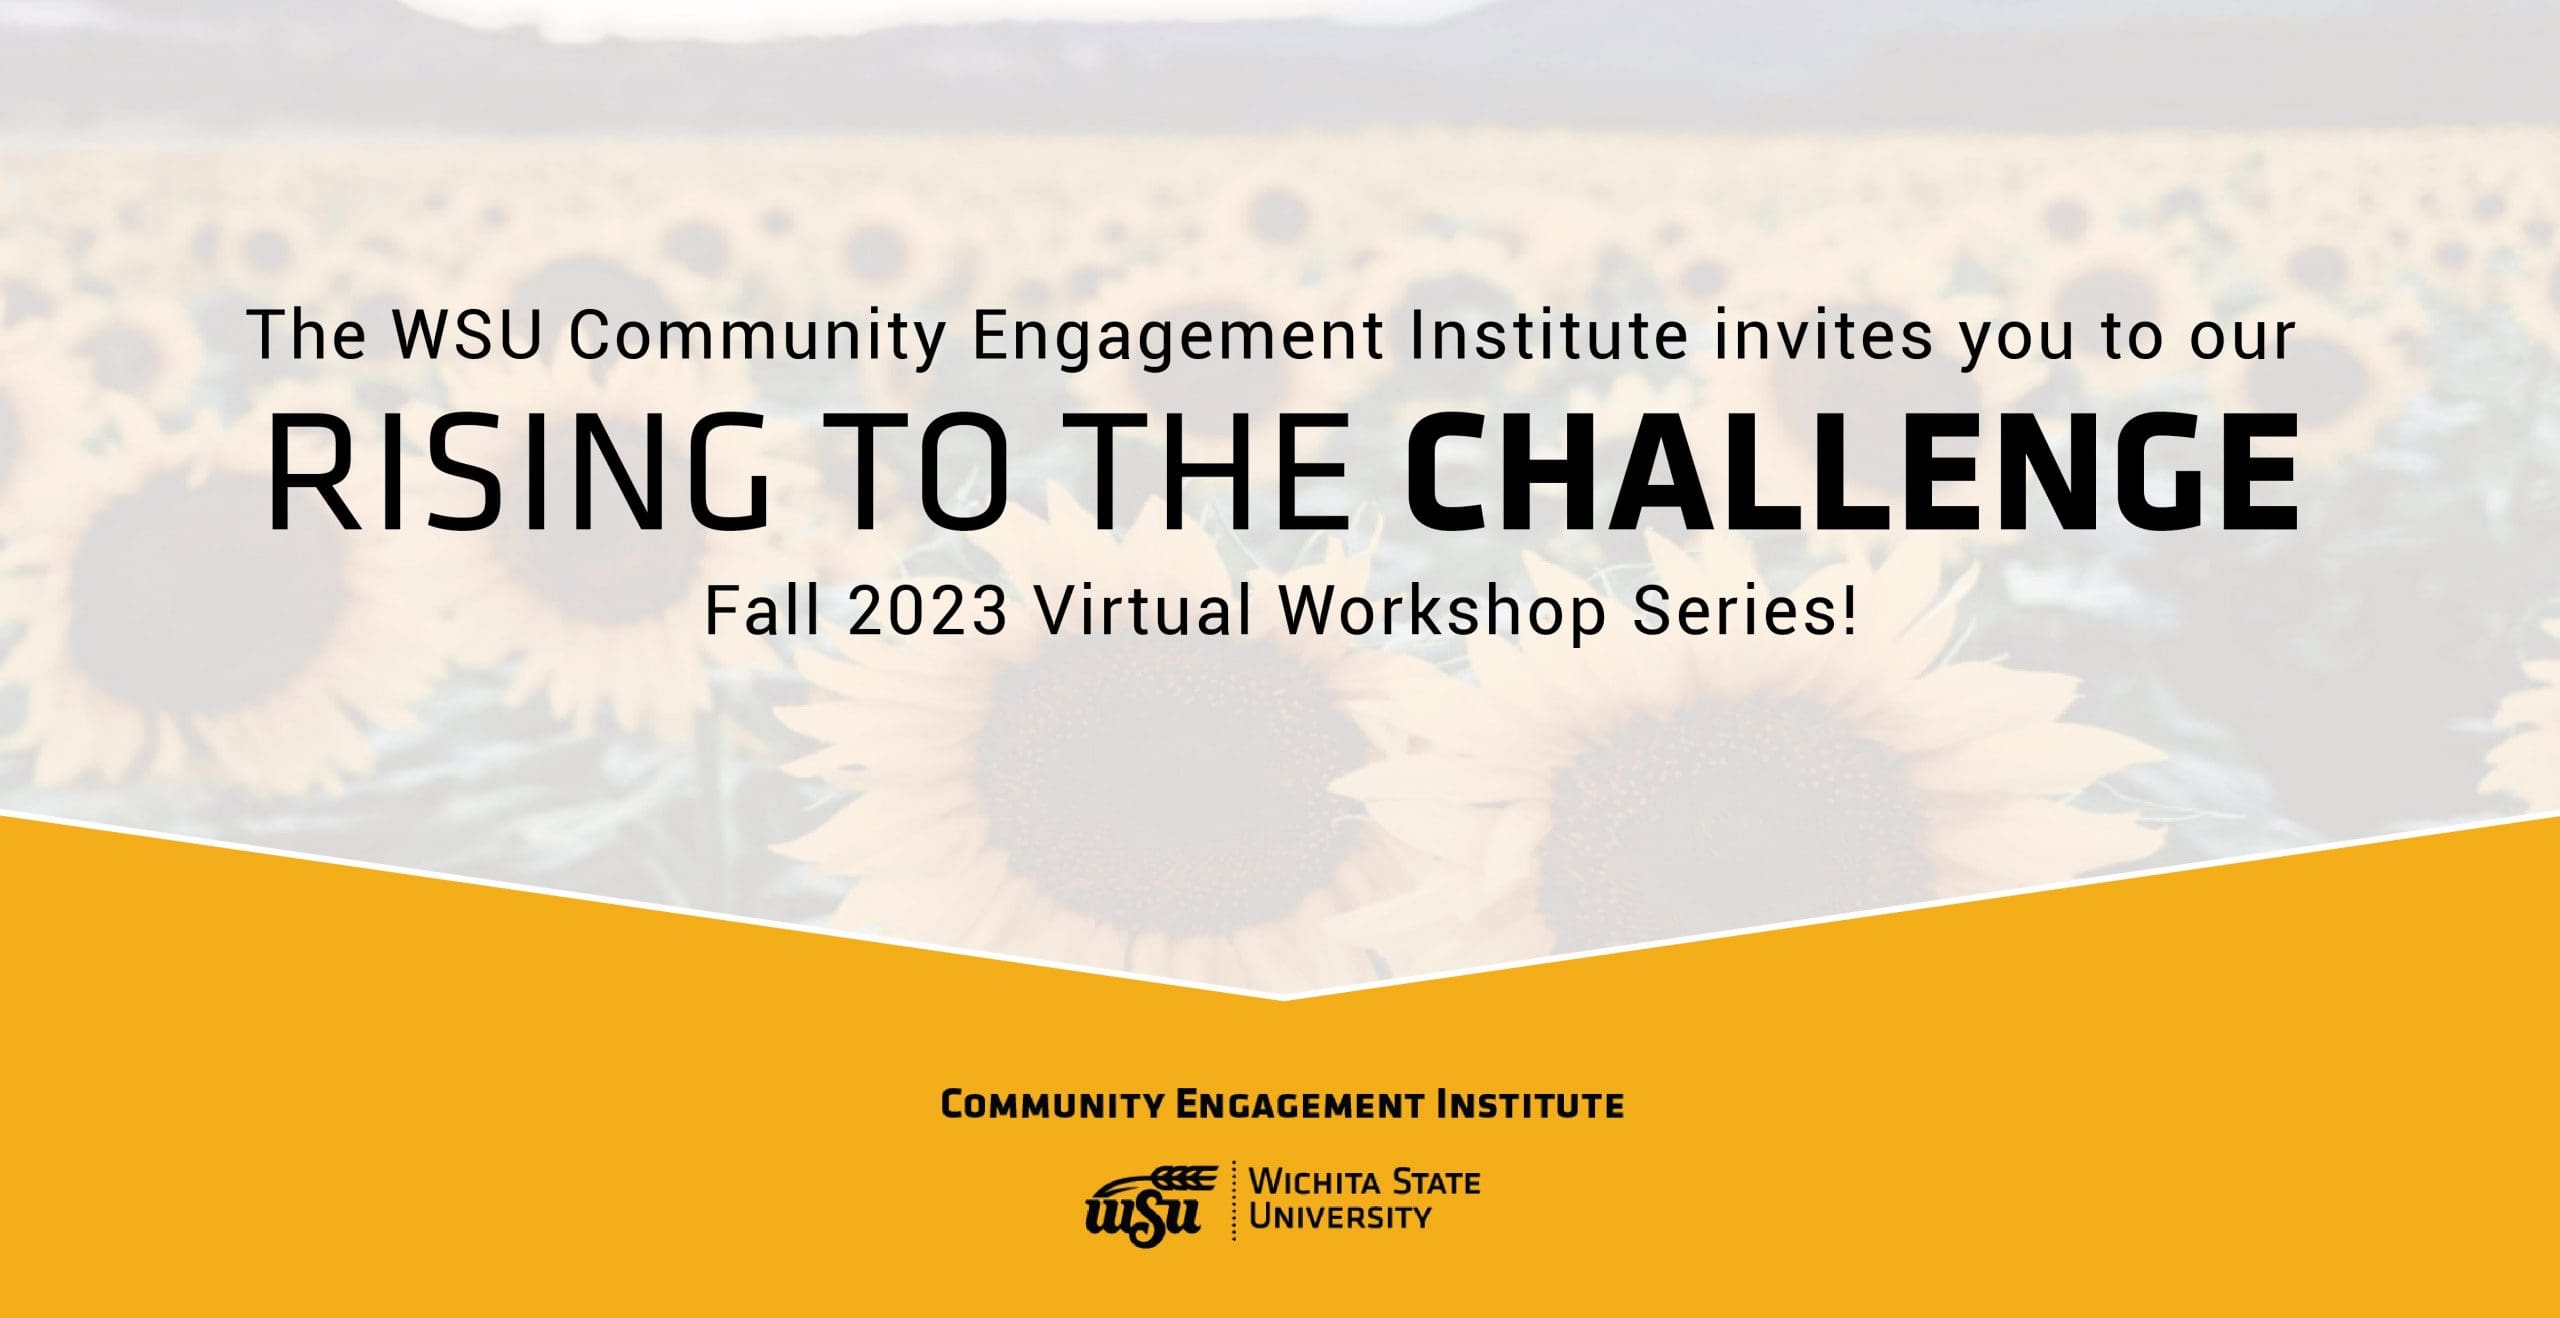 The WSU Community Engagement Institute invites you to our Rising to the Challenge Fall 2023 Virtual Workshop Series!